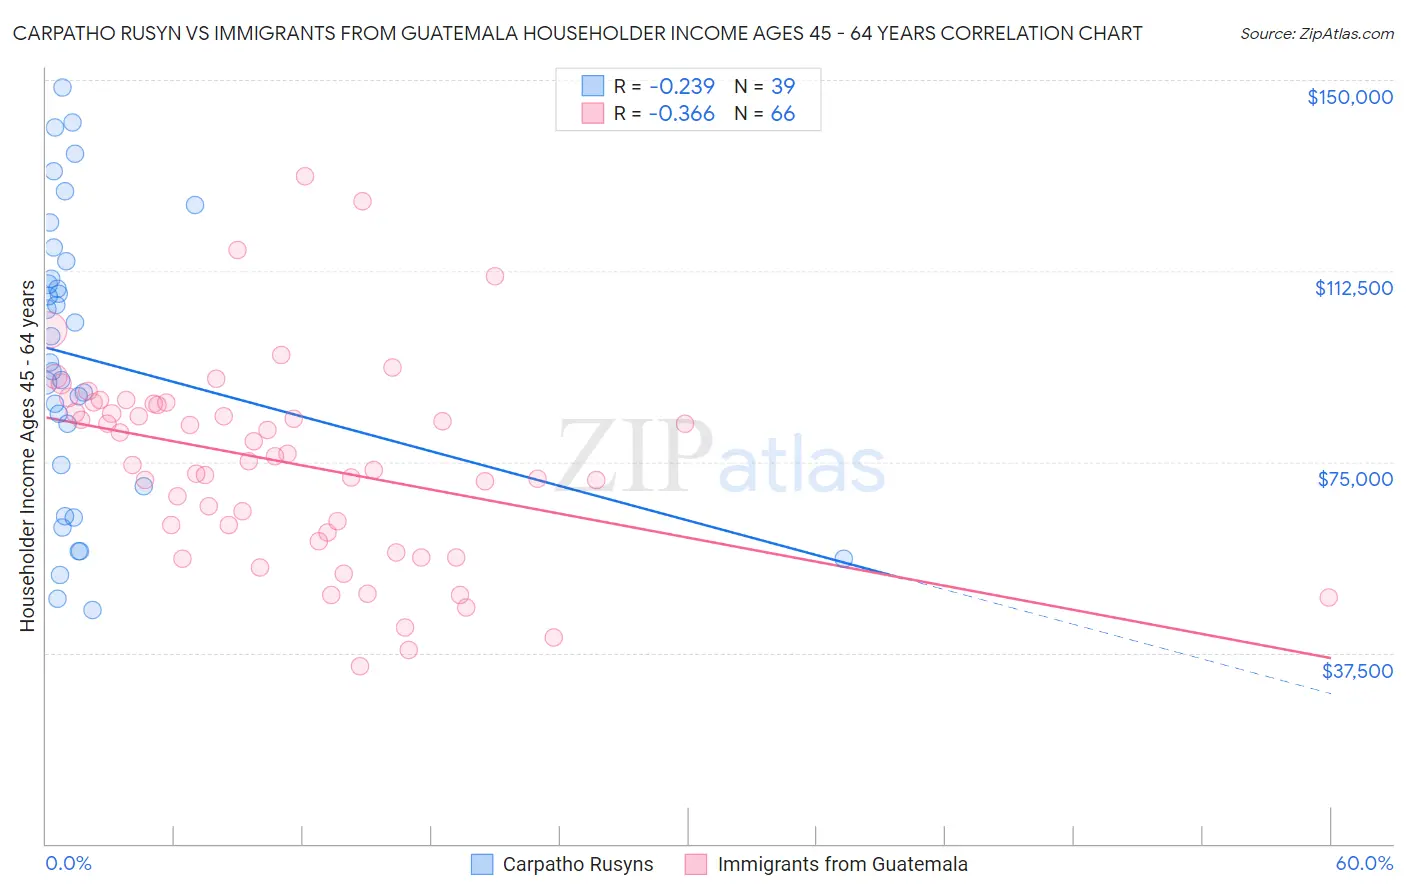 Carpatho Rusyn vs Immigrants from Guatemala Householder Income Ages 45 - 64 years